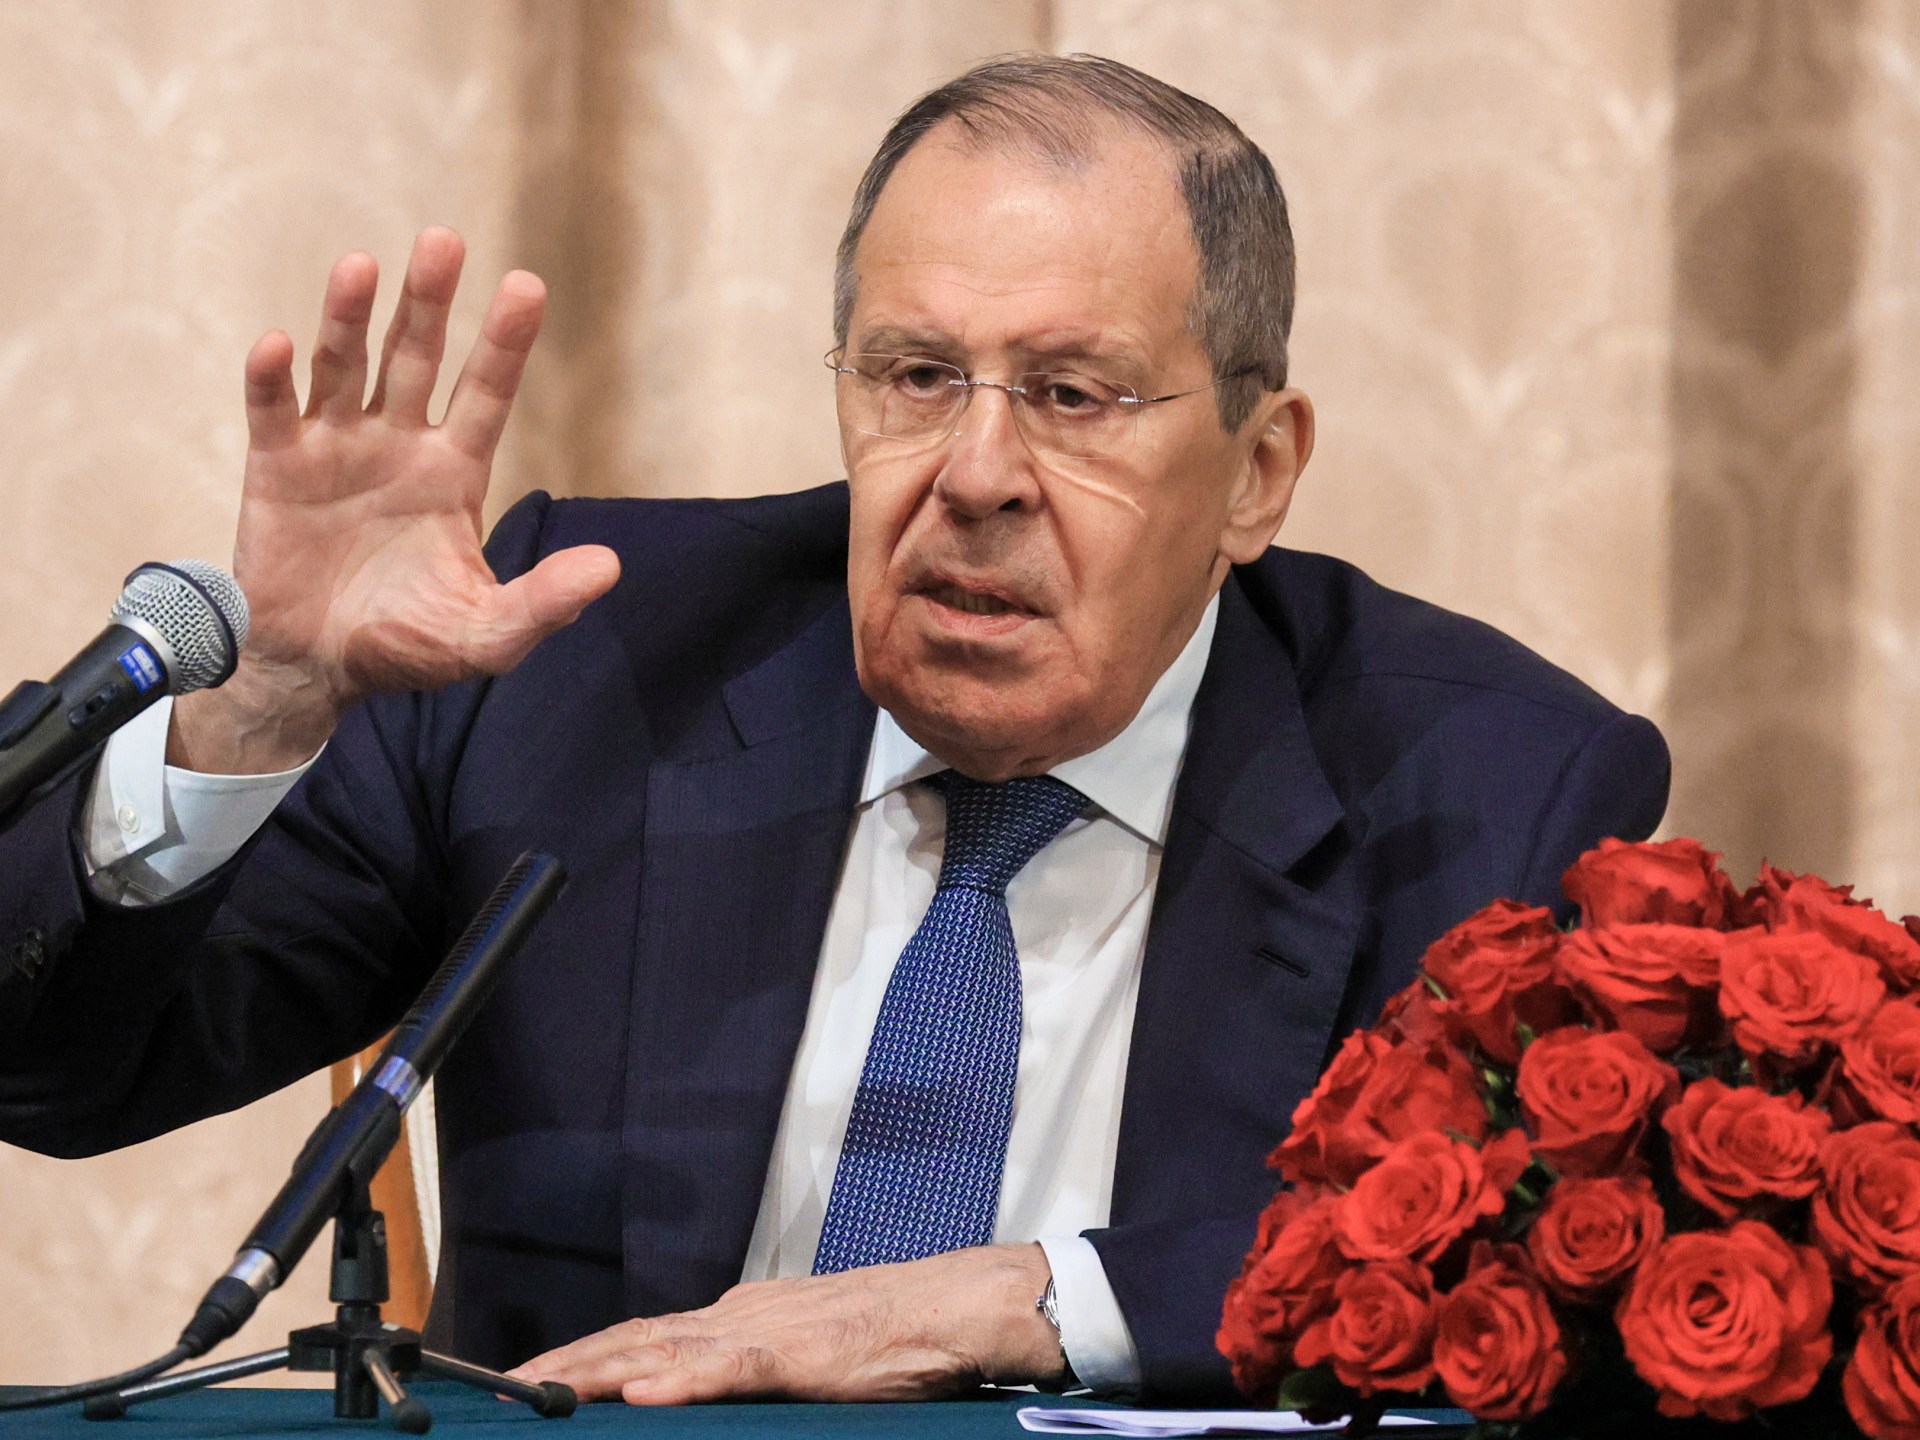 Lavrov hails Moscow-Beijing ties, accuses US of provocations